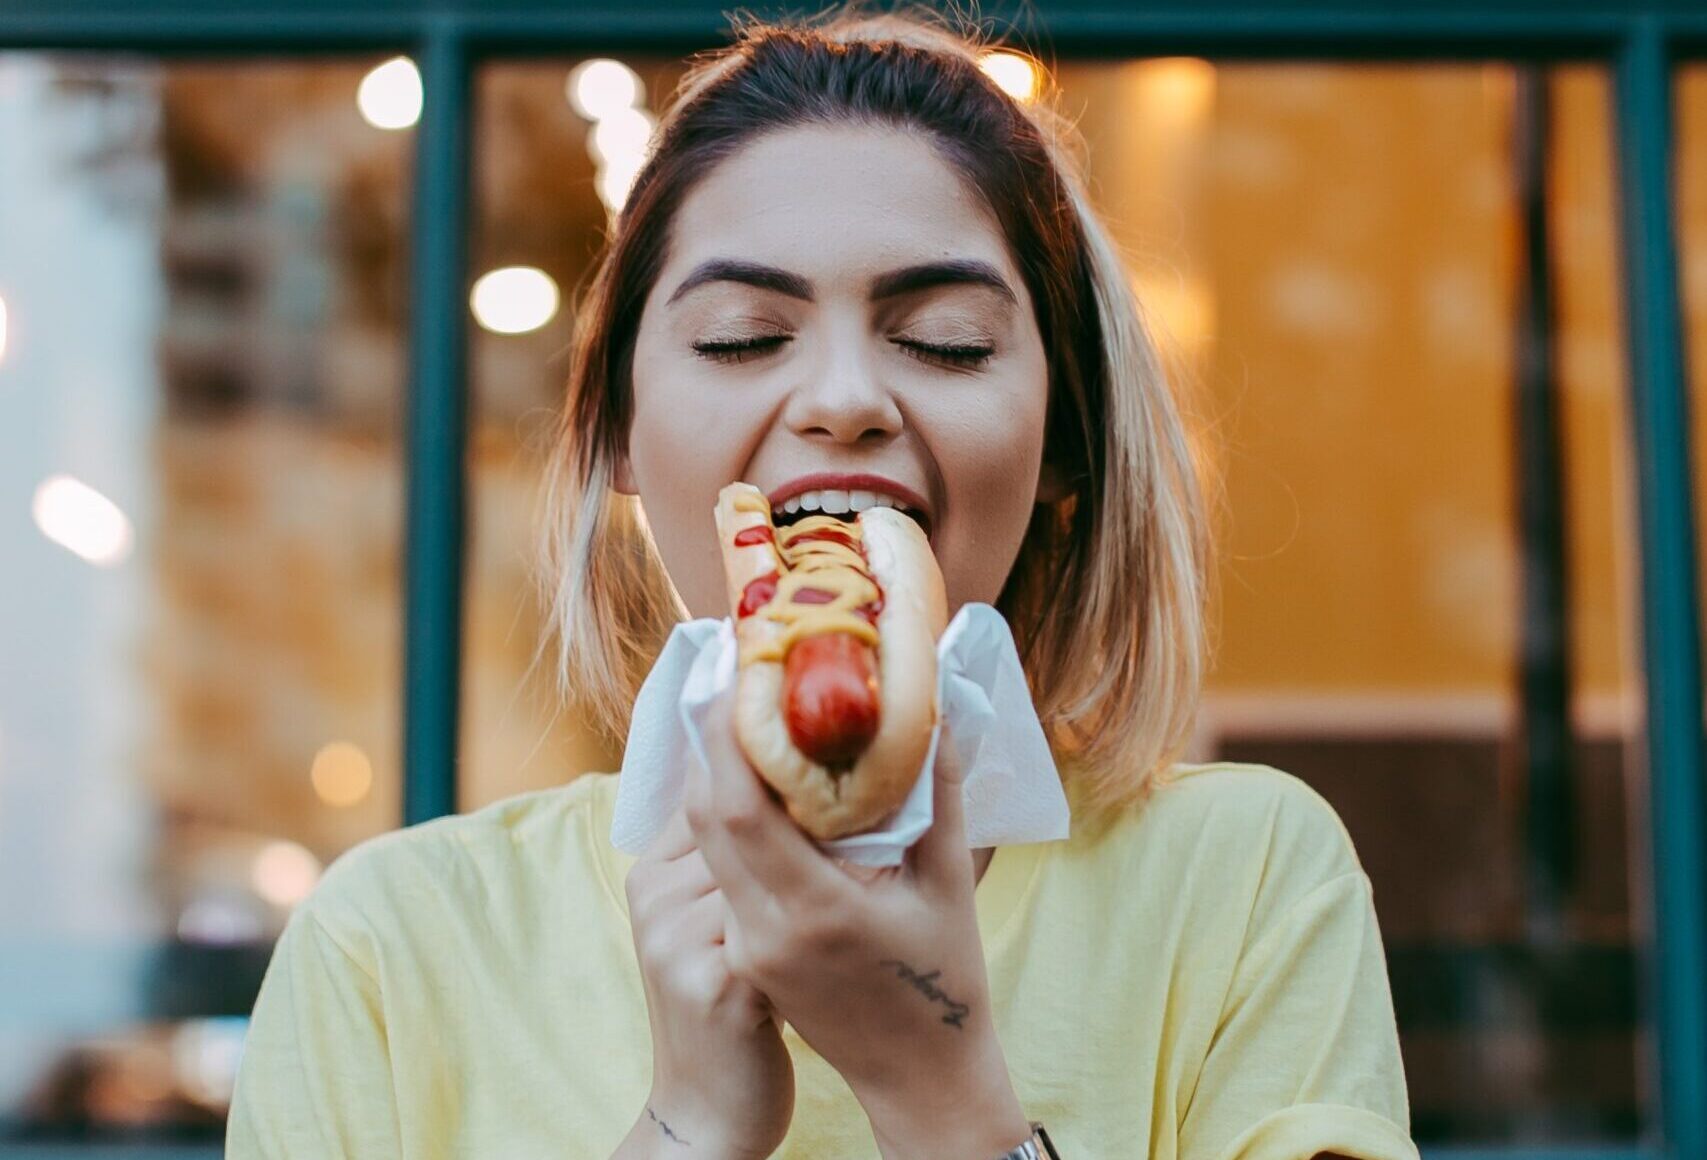 Woman having a hot dog. Purchase by impulse